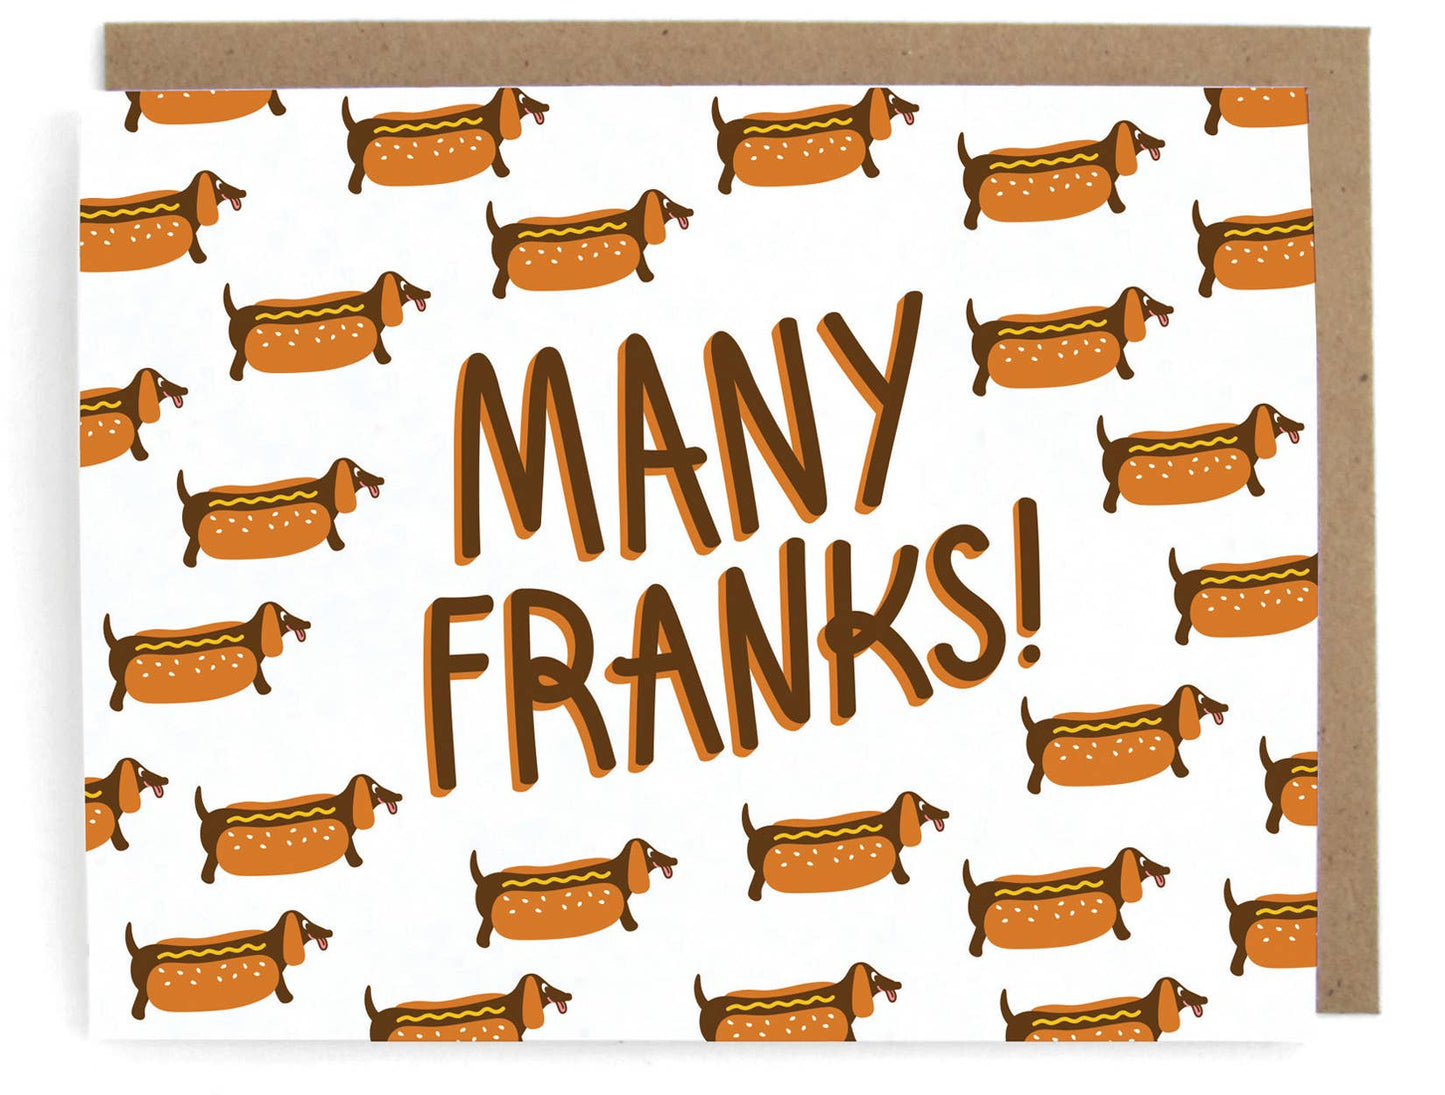 Many Franks! thank you greeting card. Design has wiener dogs in hot dog buns 